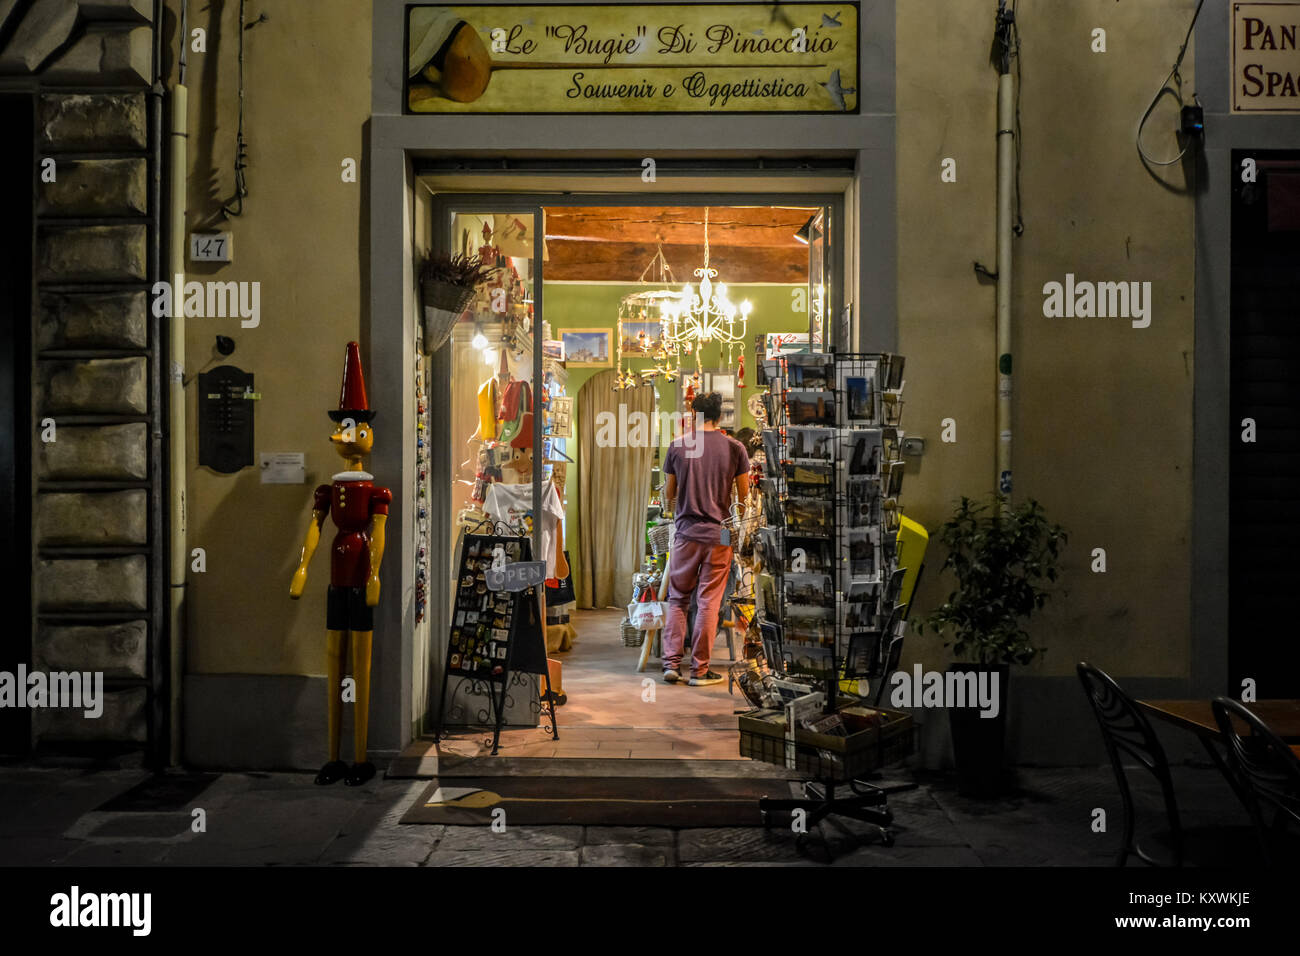 An oversize Pinocchio marionette puppet outside a gift and souvenir shop in Pisa Italy late in the evening with a customer inside Stock Photo